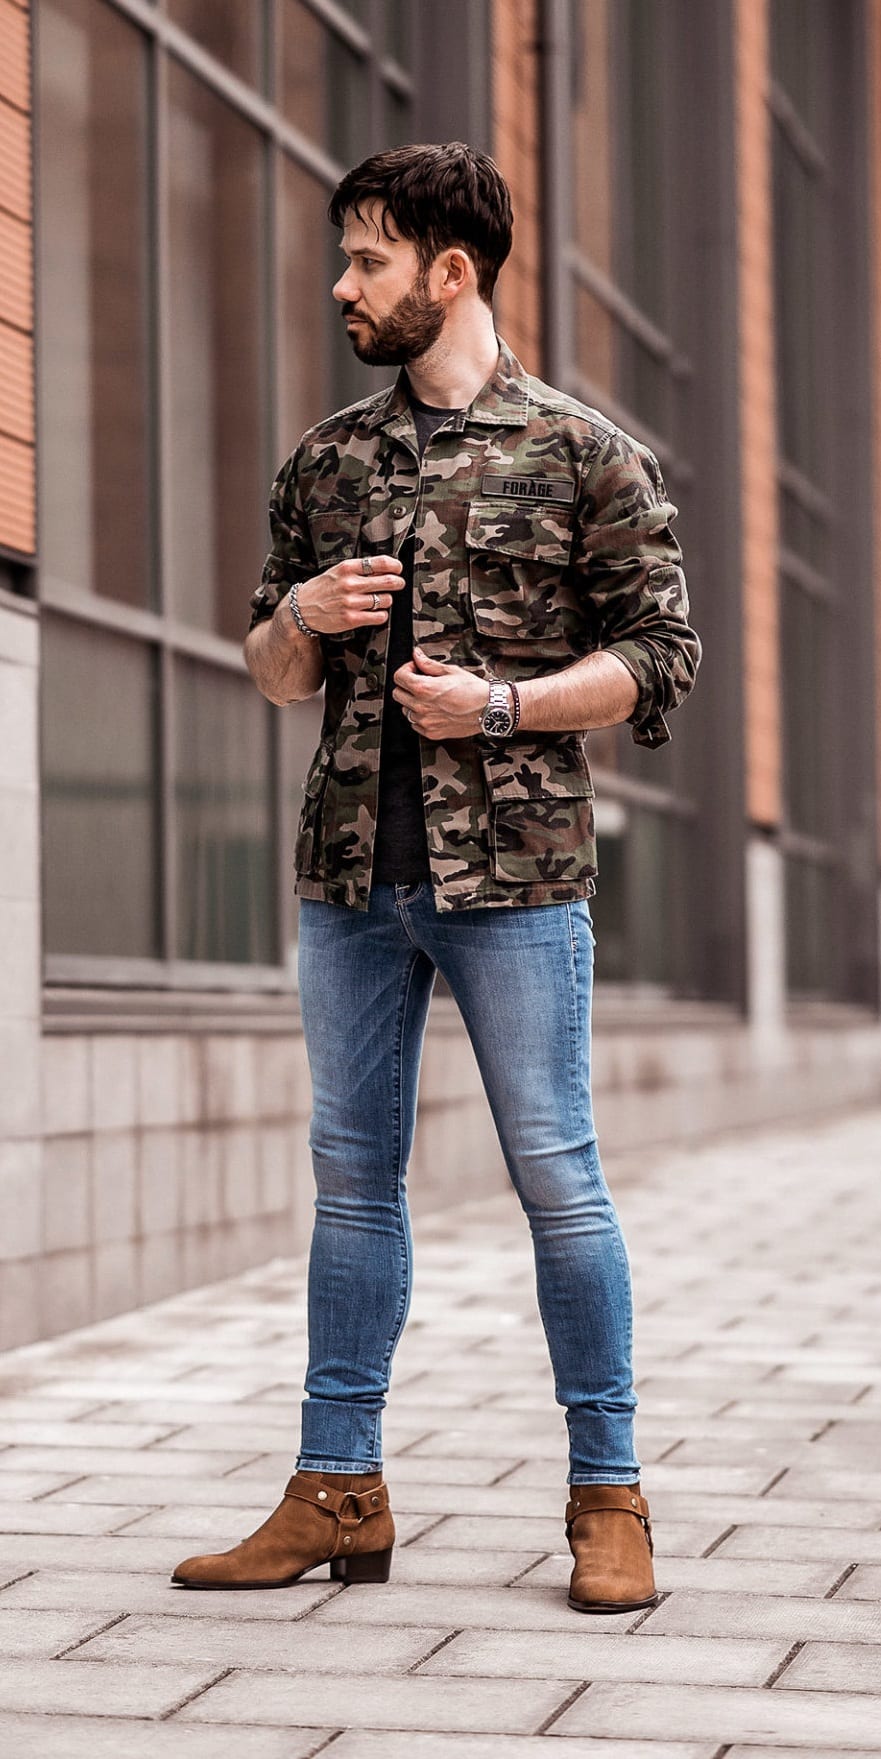 Camouflage Jacket Outfit Ideas 2020